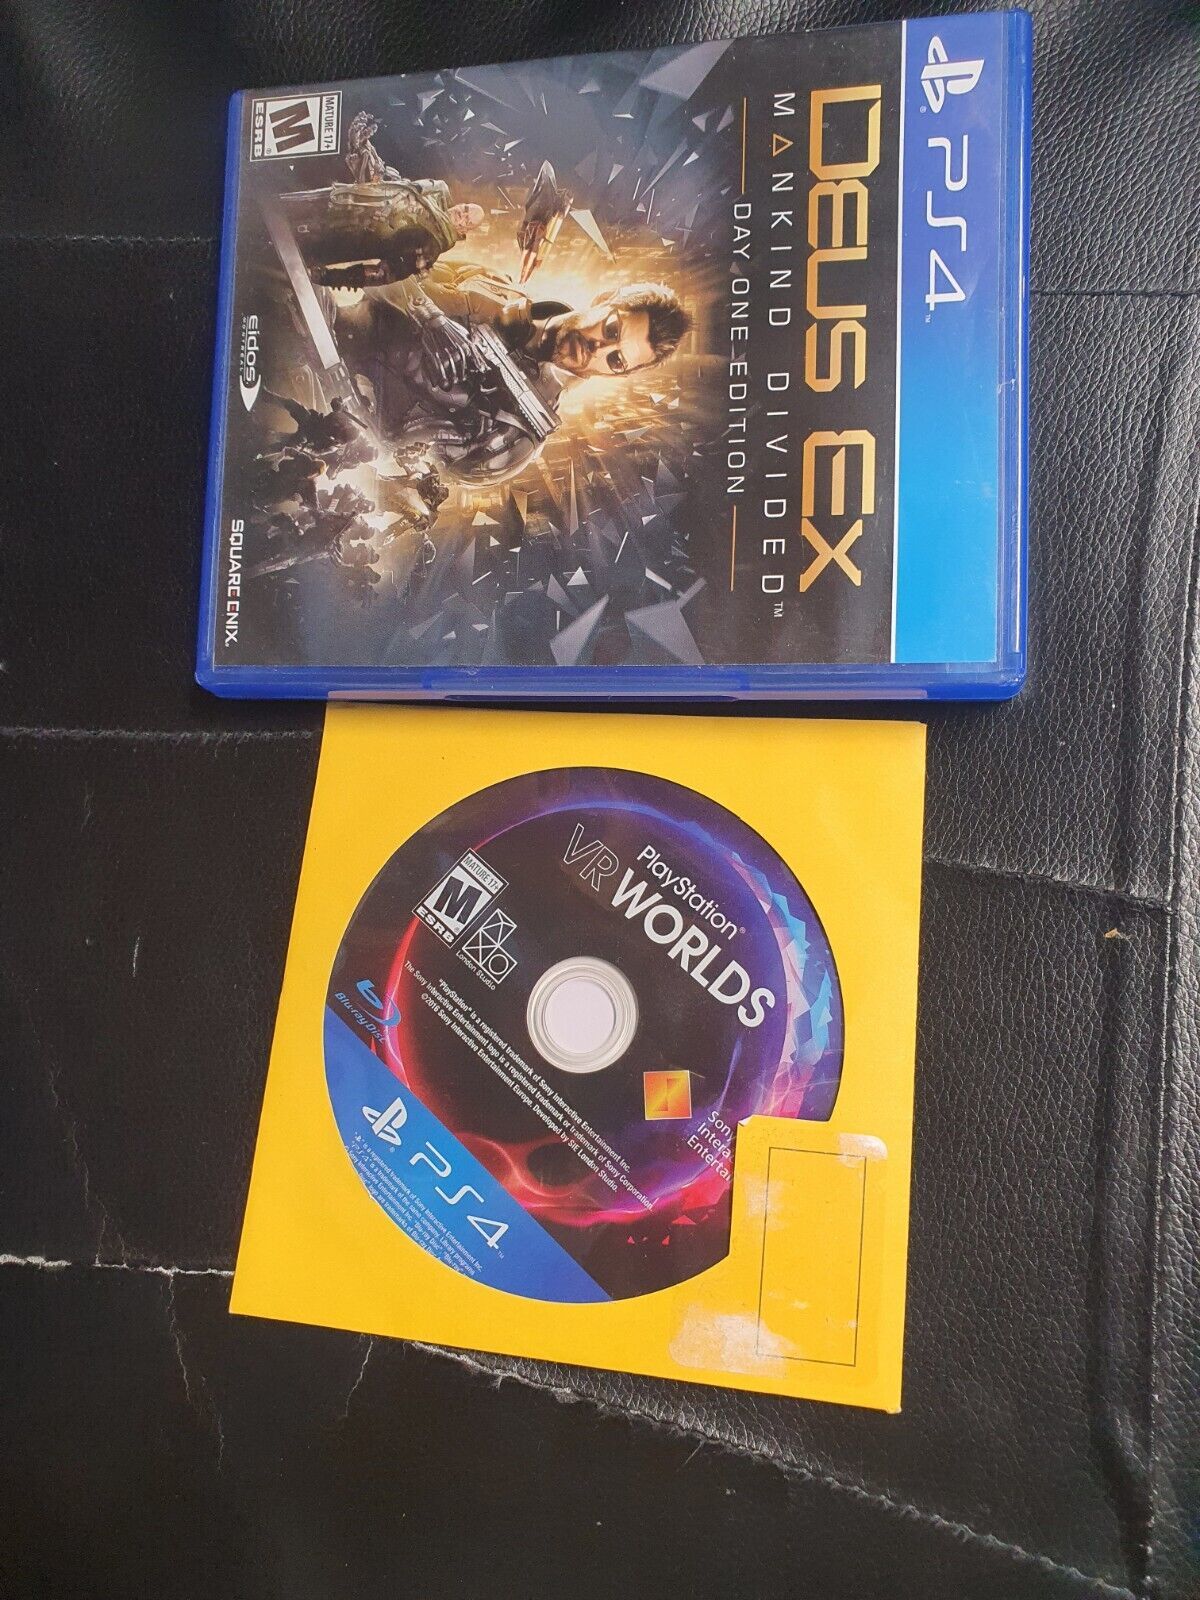 Primary image for lot of 2: Playstation VR WORLDS [GAME ONLY]+ DEUS EX (PlayStation 4) PS4